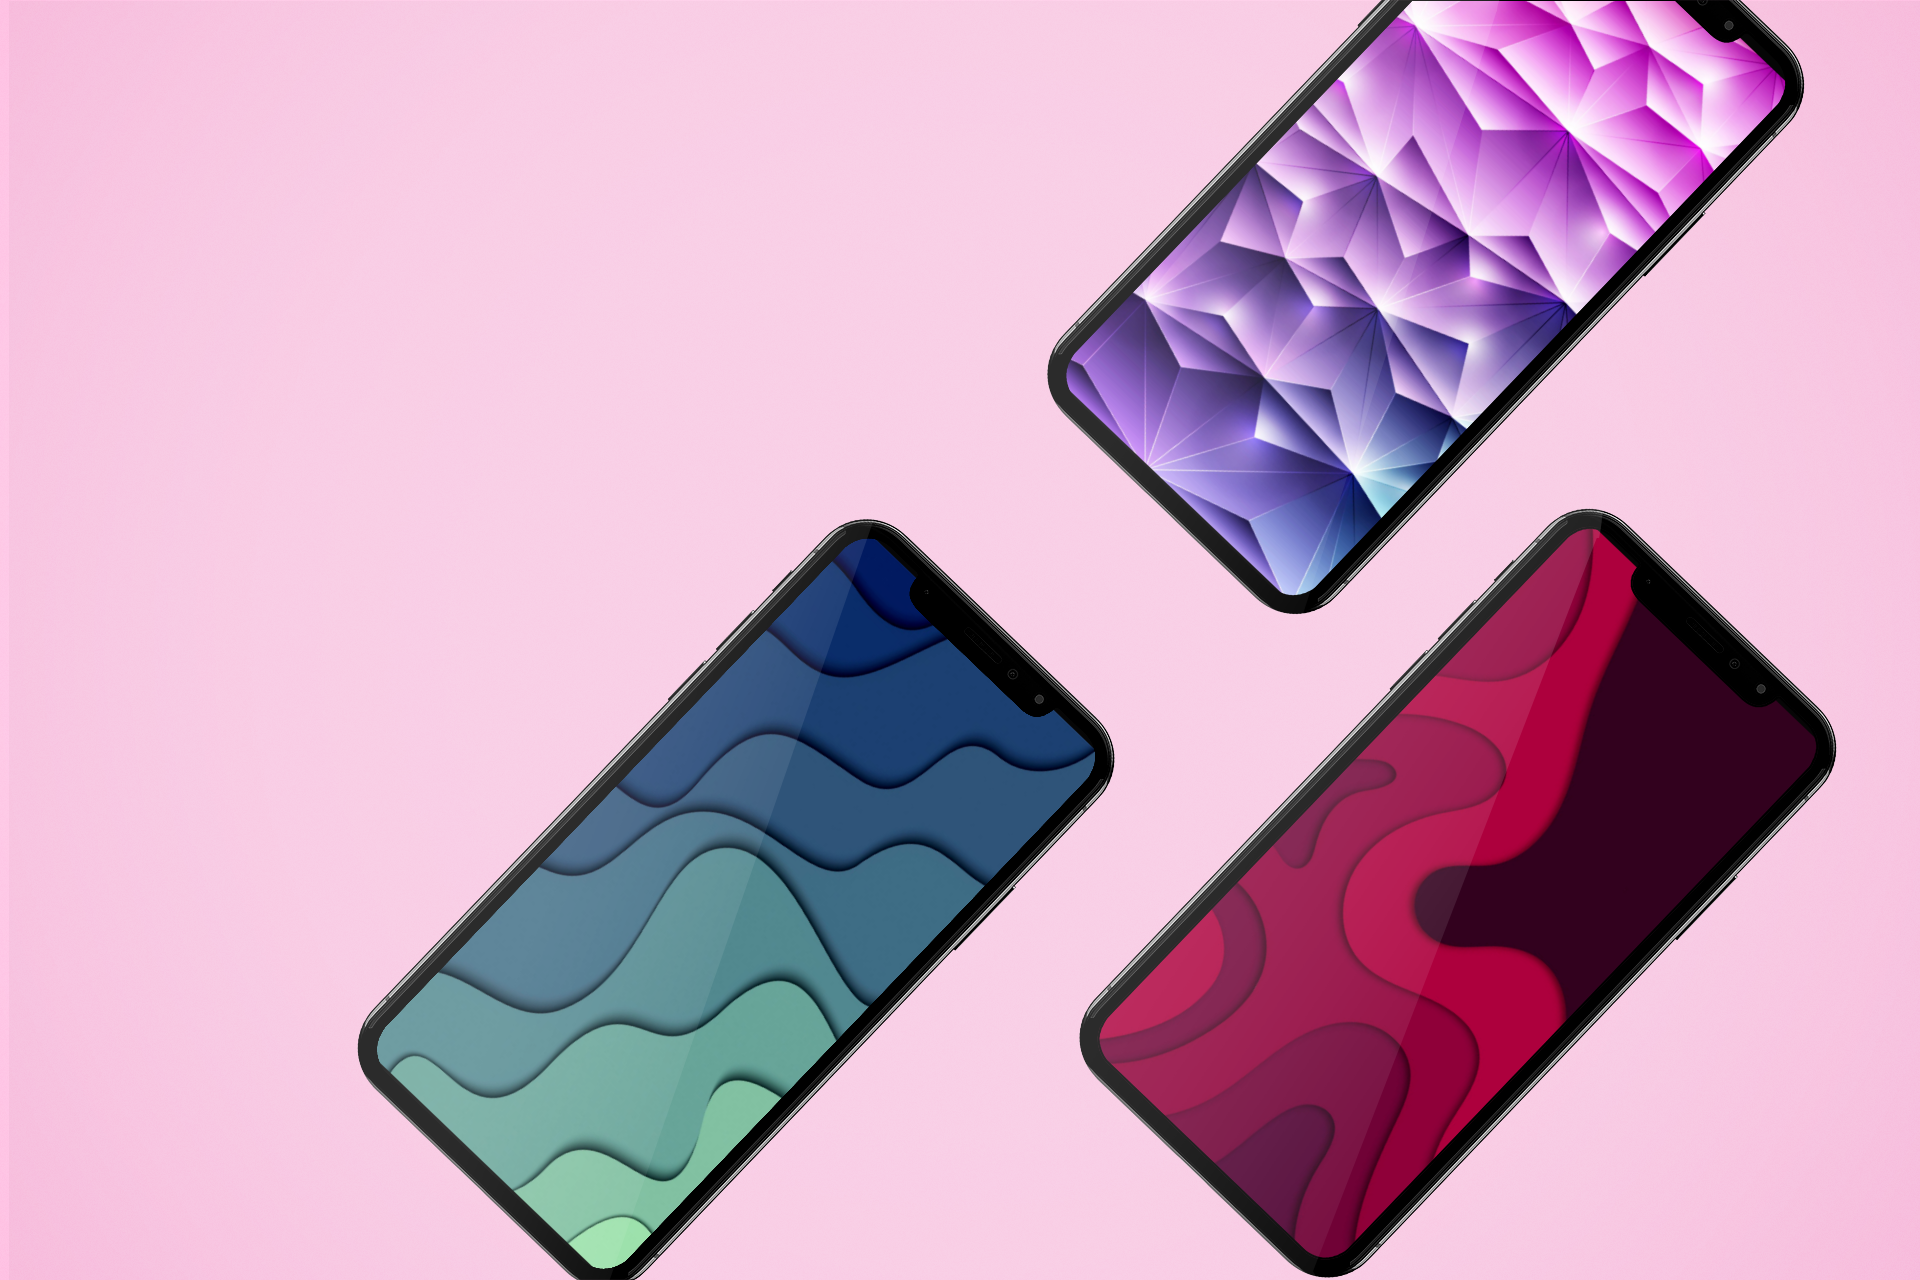 Abstract geometric iPhone wallpaper pack 1920x1280